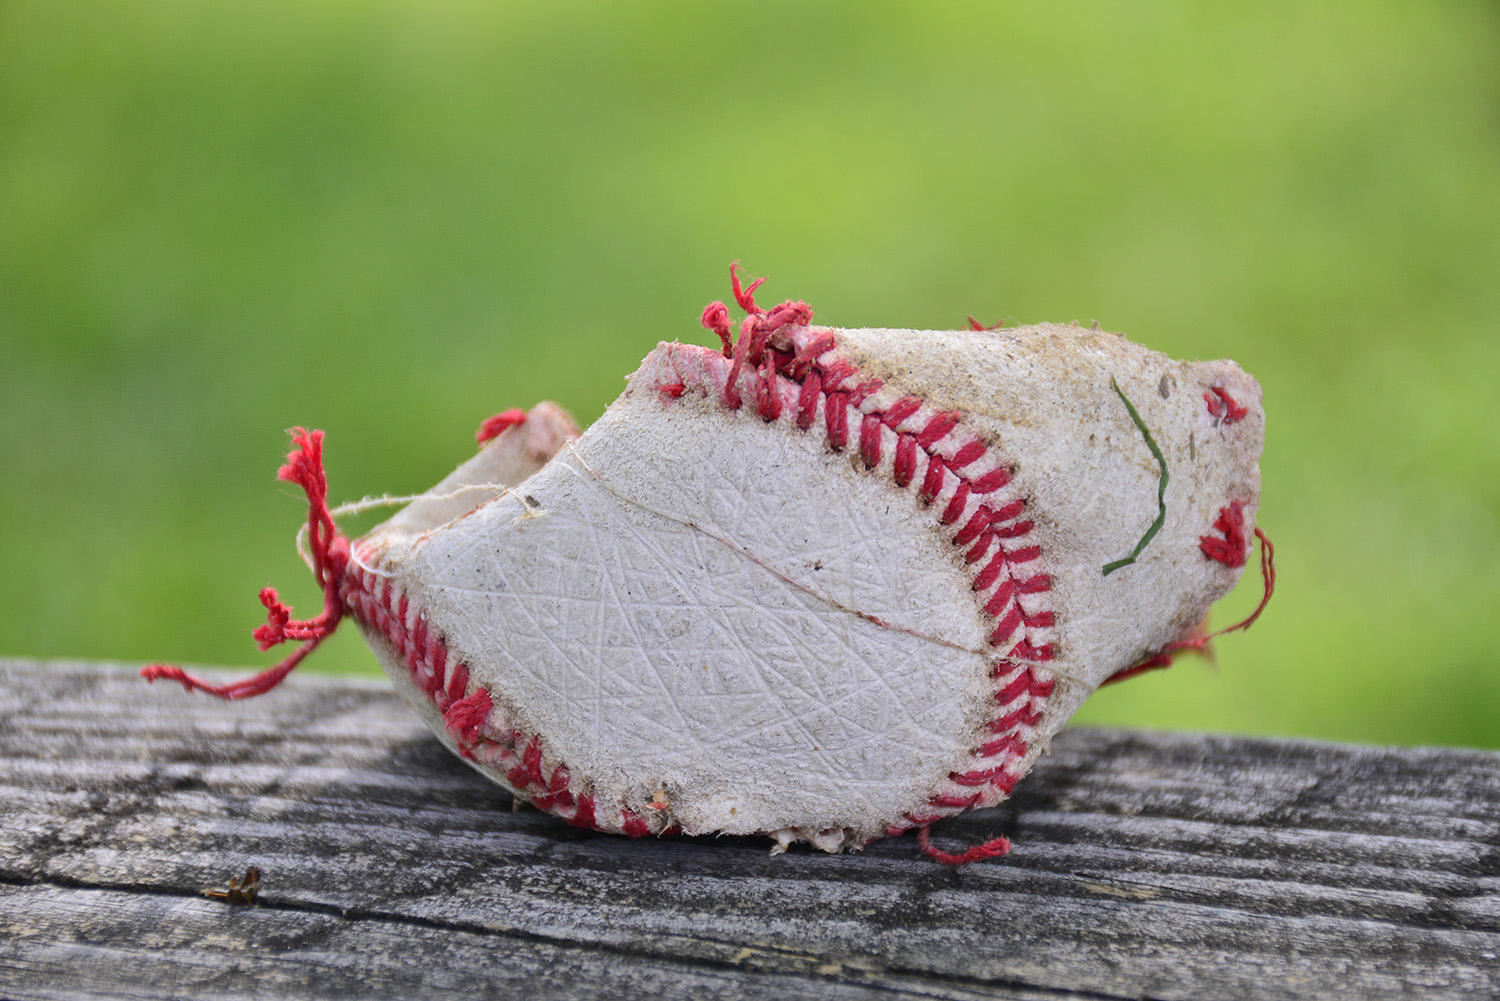 Baseball_Field_Cover_Rawhide_Knock_the_Cover_Off_Stitches_Playground.jpg